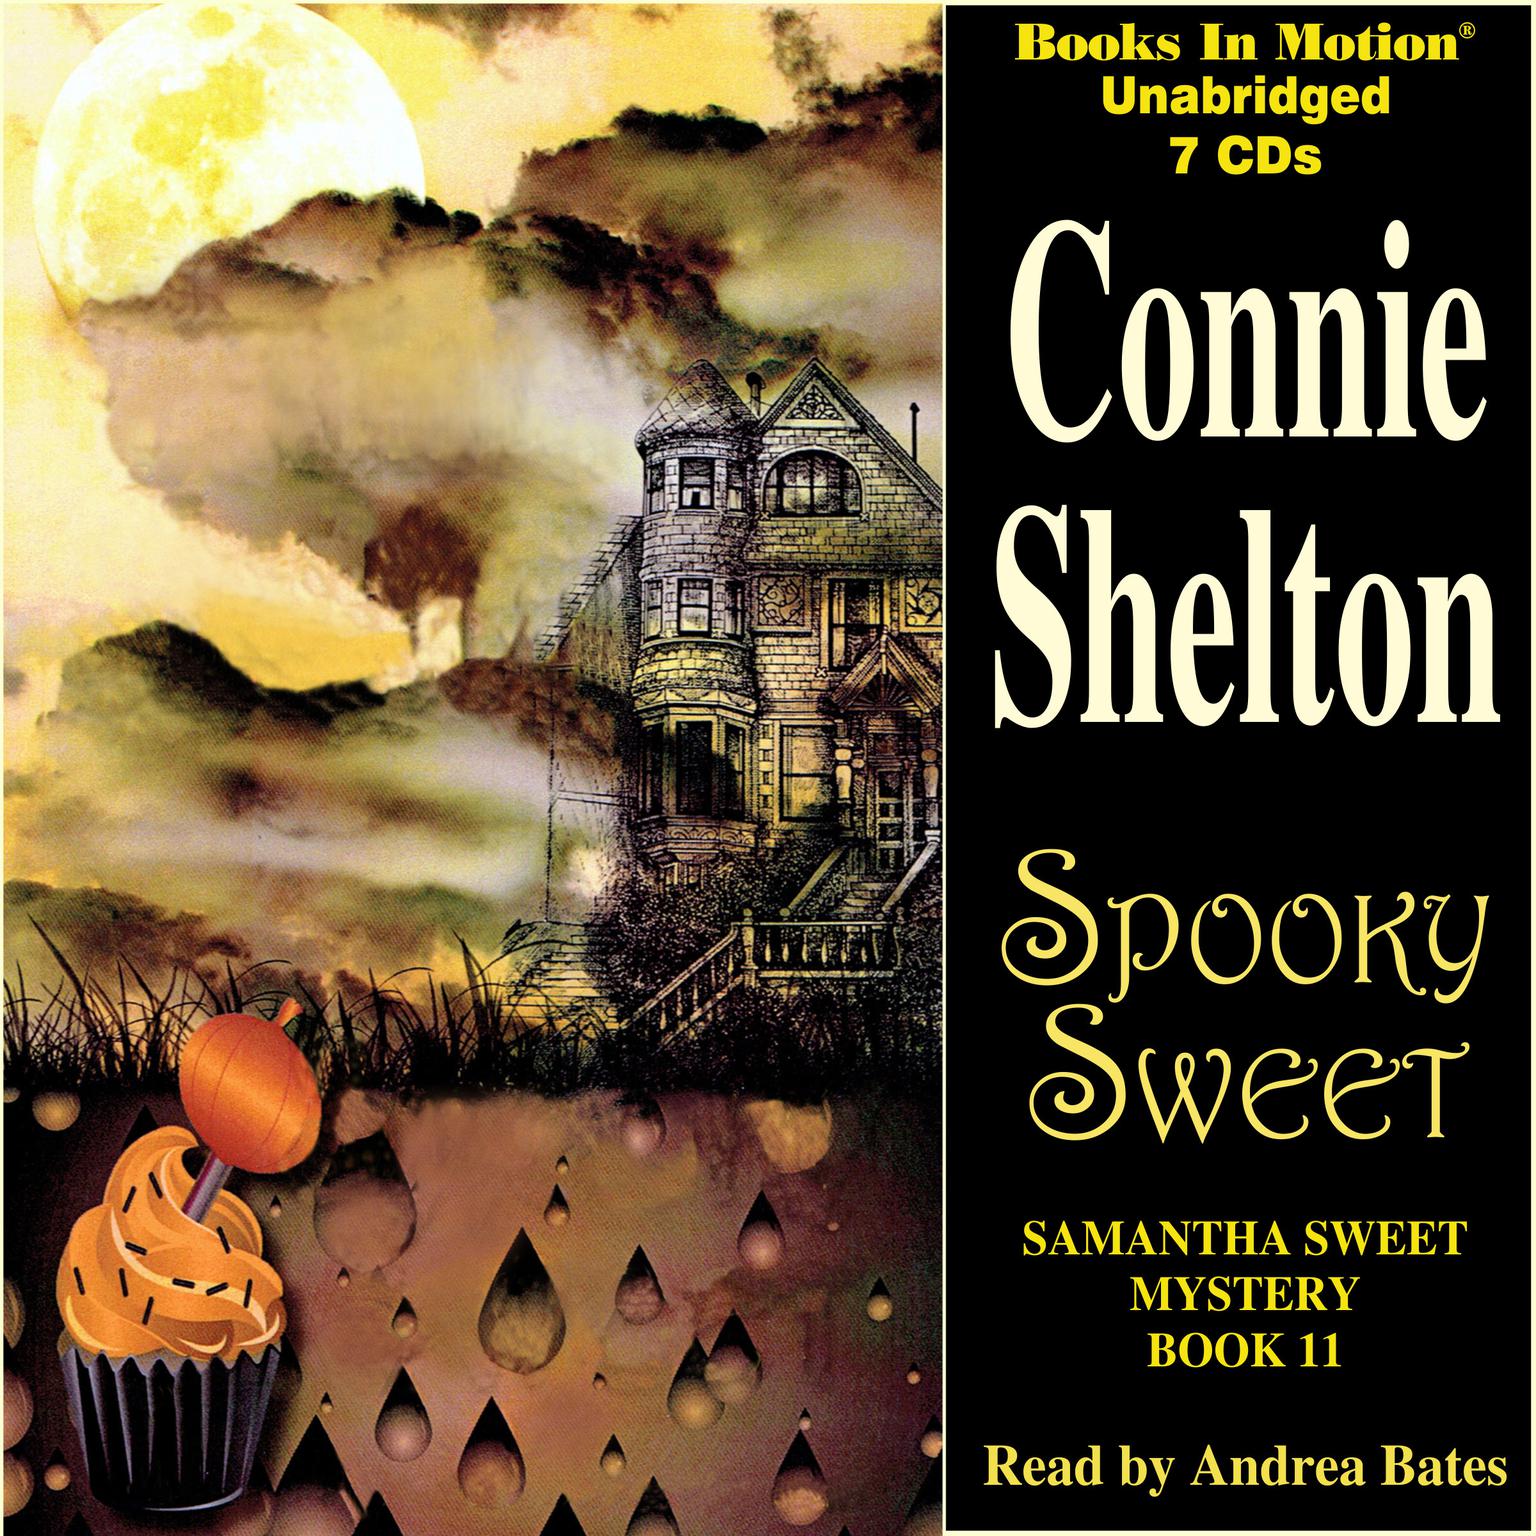 Spooky Sweet: Samantha Sweet Series, Book 11 Audiobook, by Connie Shelton